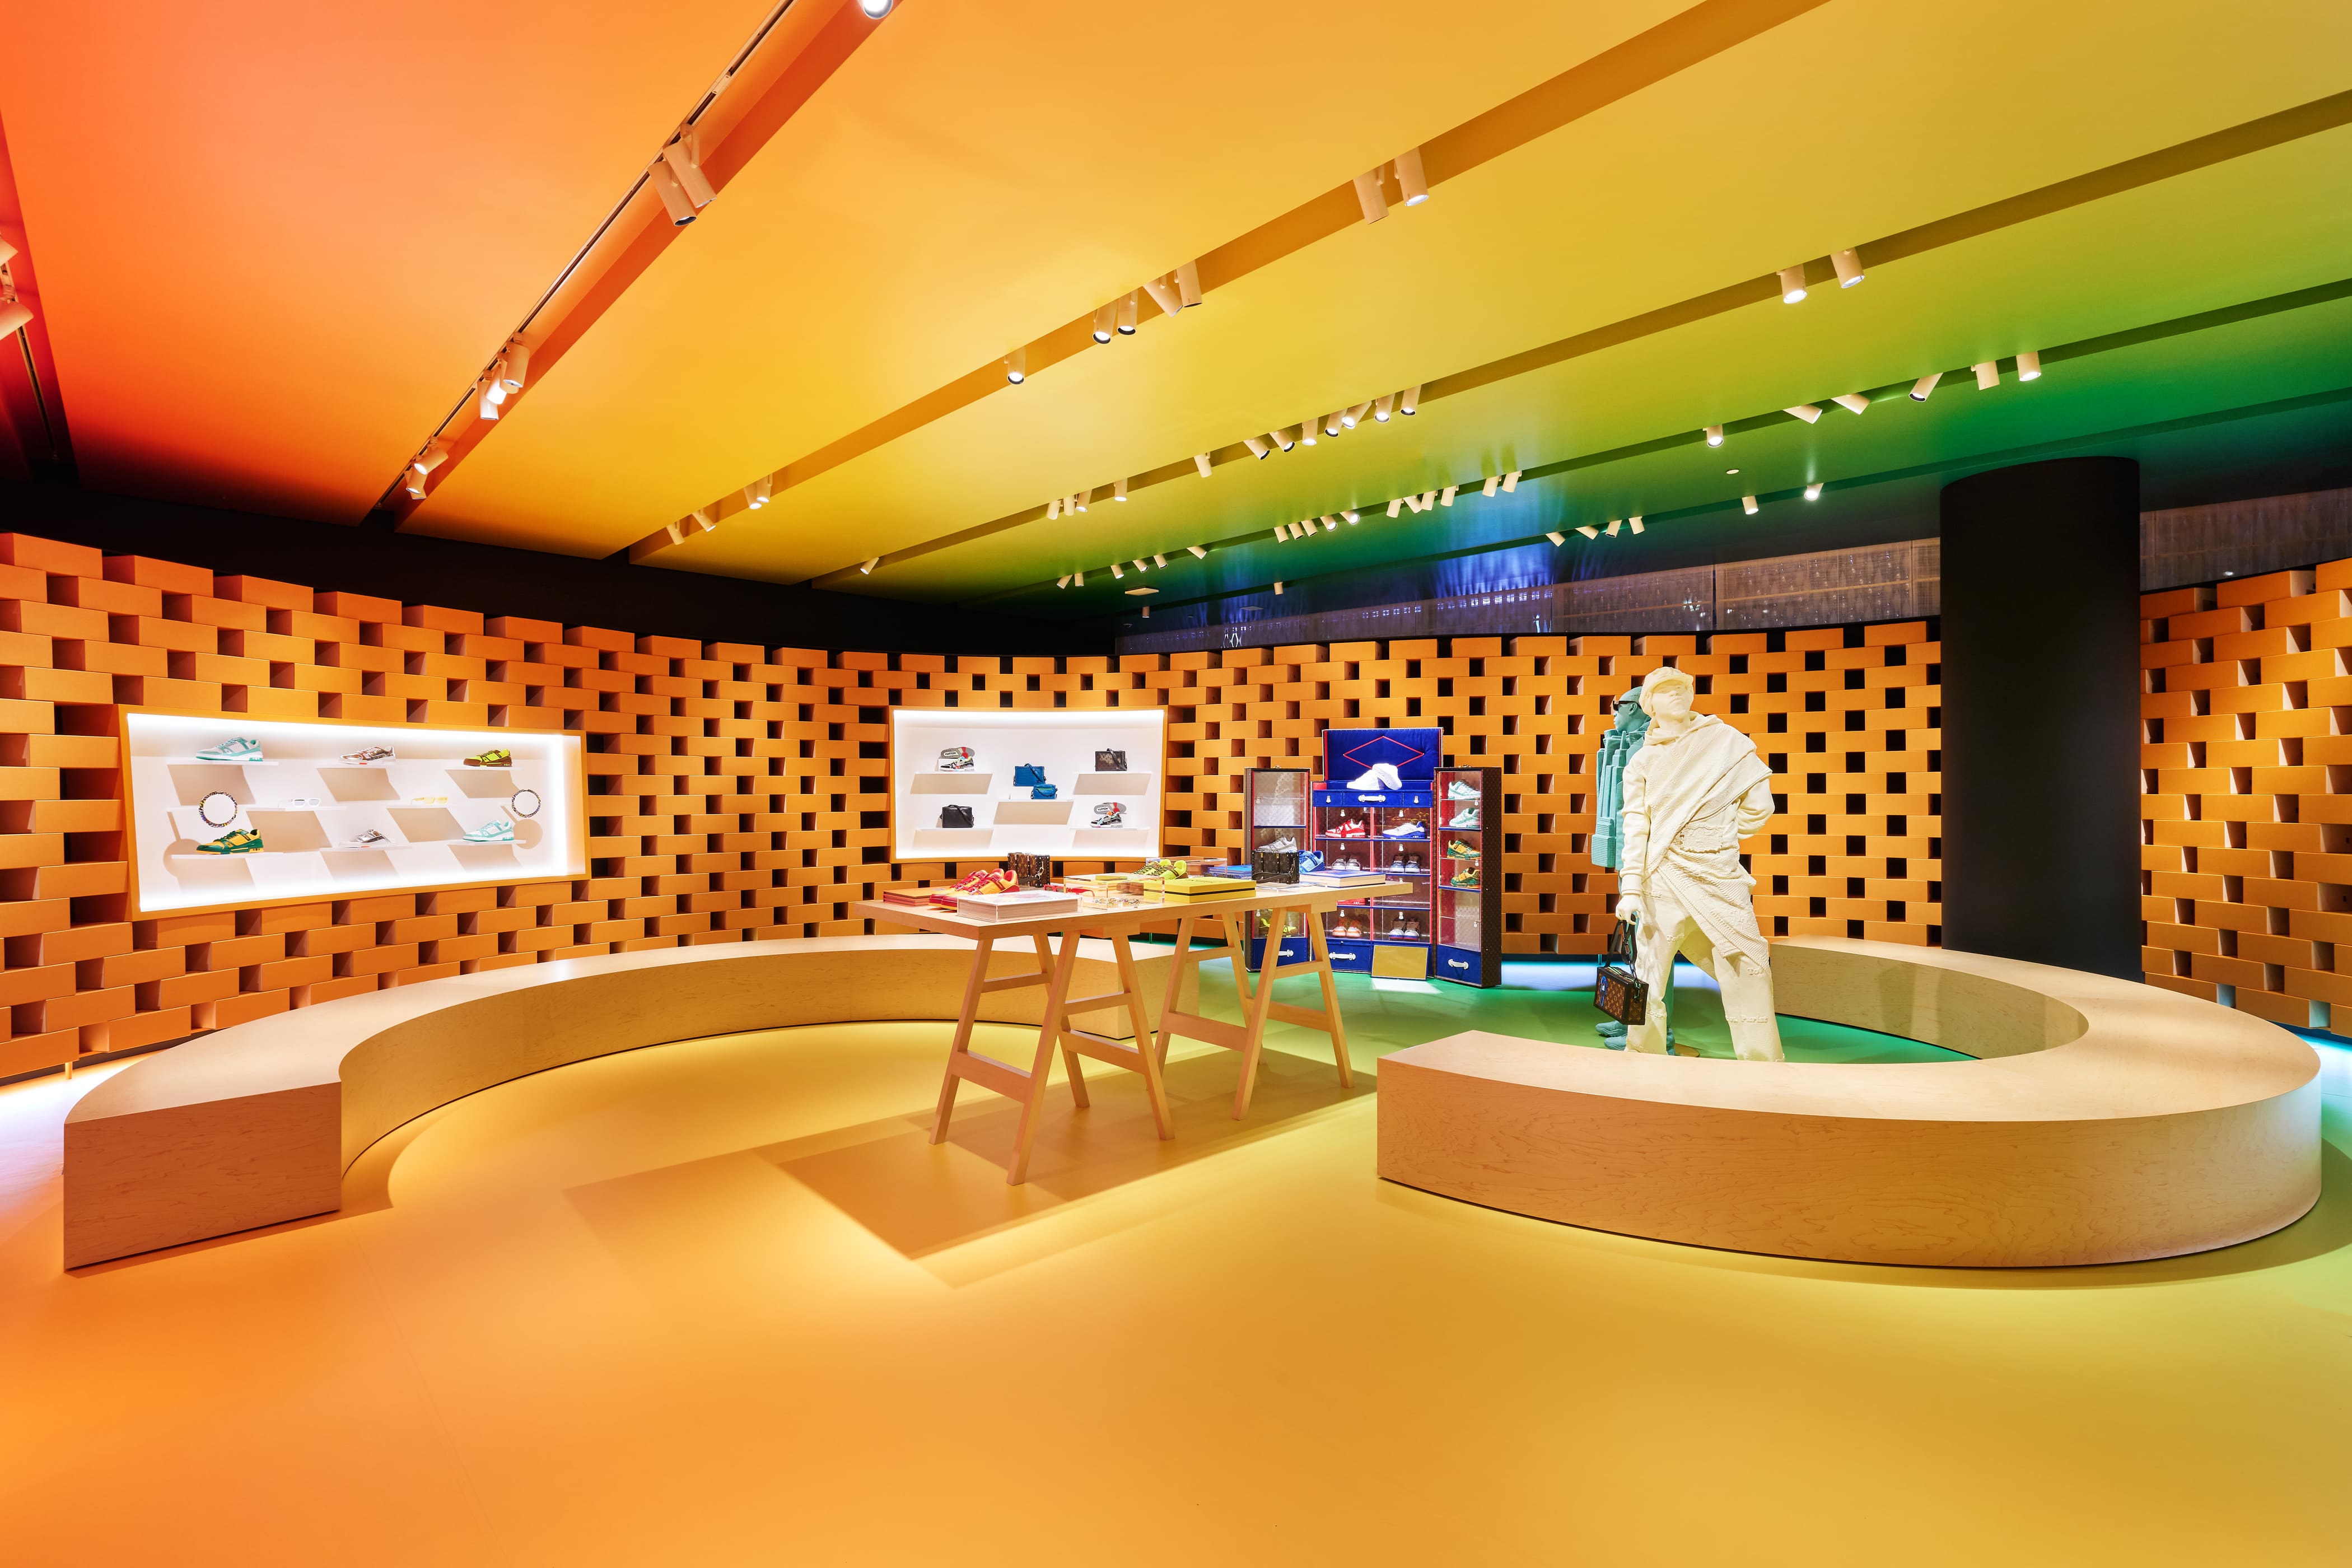 Louis Vuitton New York Soho Pop-Up store, United States